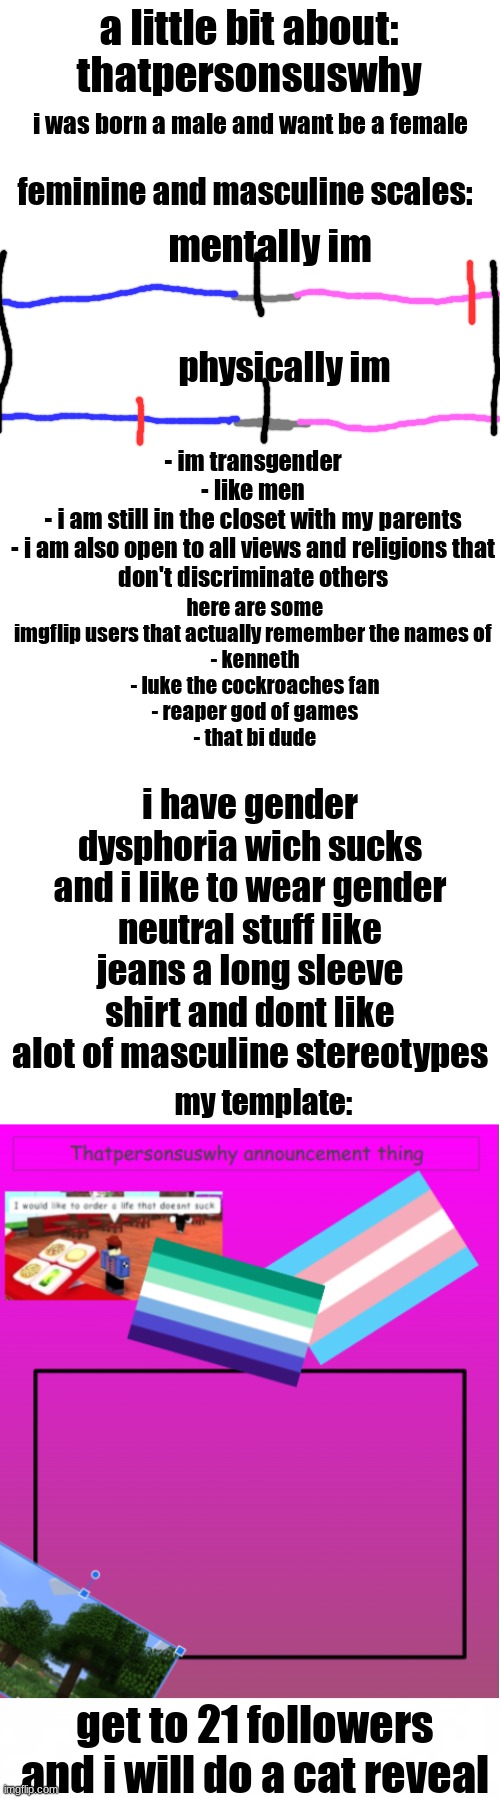 sorry if this sucks | a little bit about:
thatpersonsuswhy; i was born a male and want be a female; feminine and masculine scales:; mentally im; physically im; here are some imgflip users that actually remember the names of 

- kenneth
- luke the cockroaches fan
- reaper god of games
- that bi dude; - im transgender

- like men

- i am still in the closet with my parents

- i am also open to all views and religions that don't discriminate others; i have gender dysphoria wich sucks and i like to wear gender neutral stuff like jeans a long sleeve shirt and dont like alot of masculine stereotypes; my template:; get to 21 followers and i will do a cat reveal | image tagged in blank white template,short blank,a little about me | made w/ Imgflip meme maker